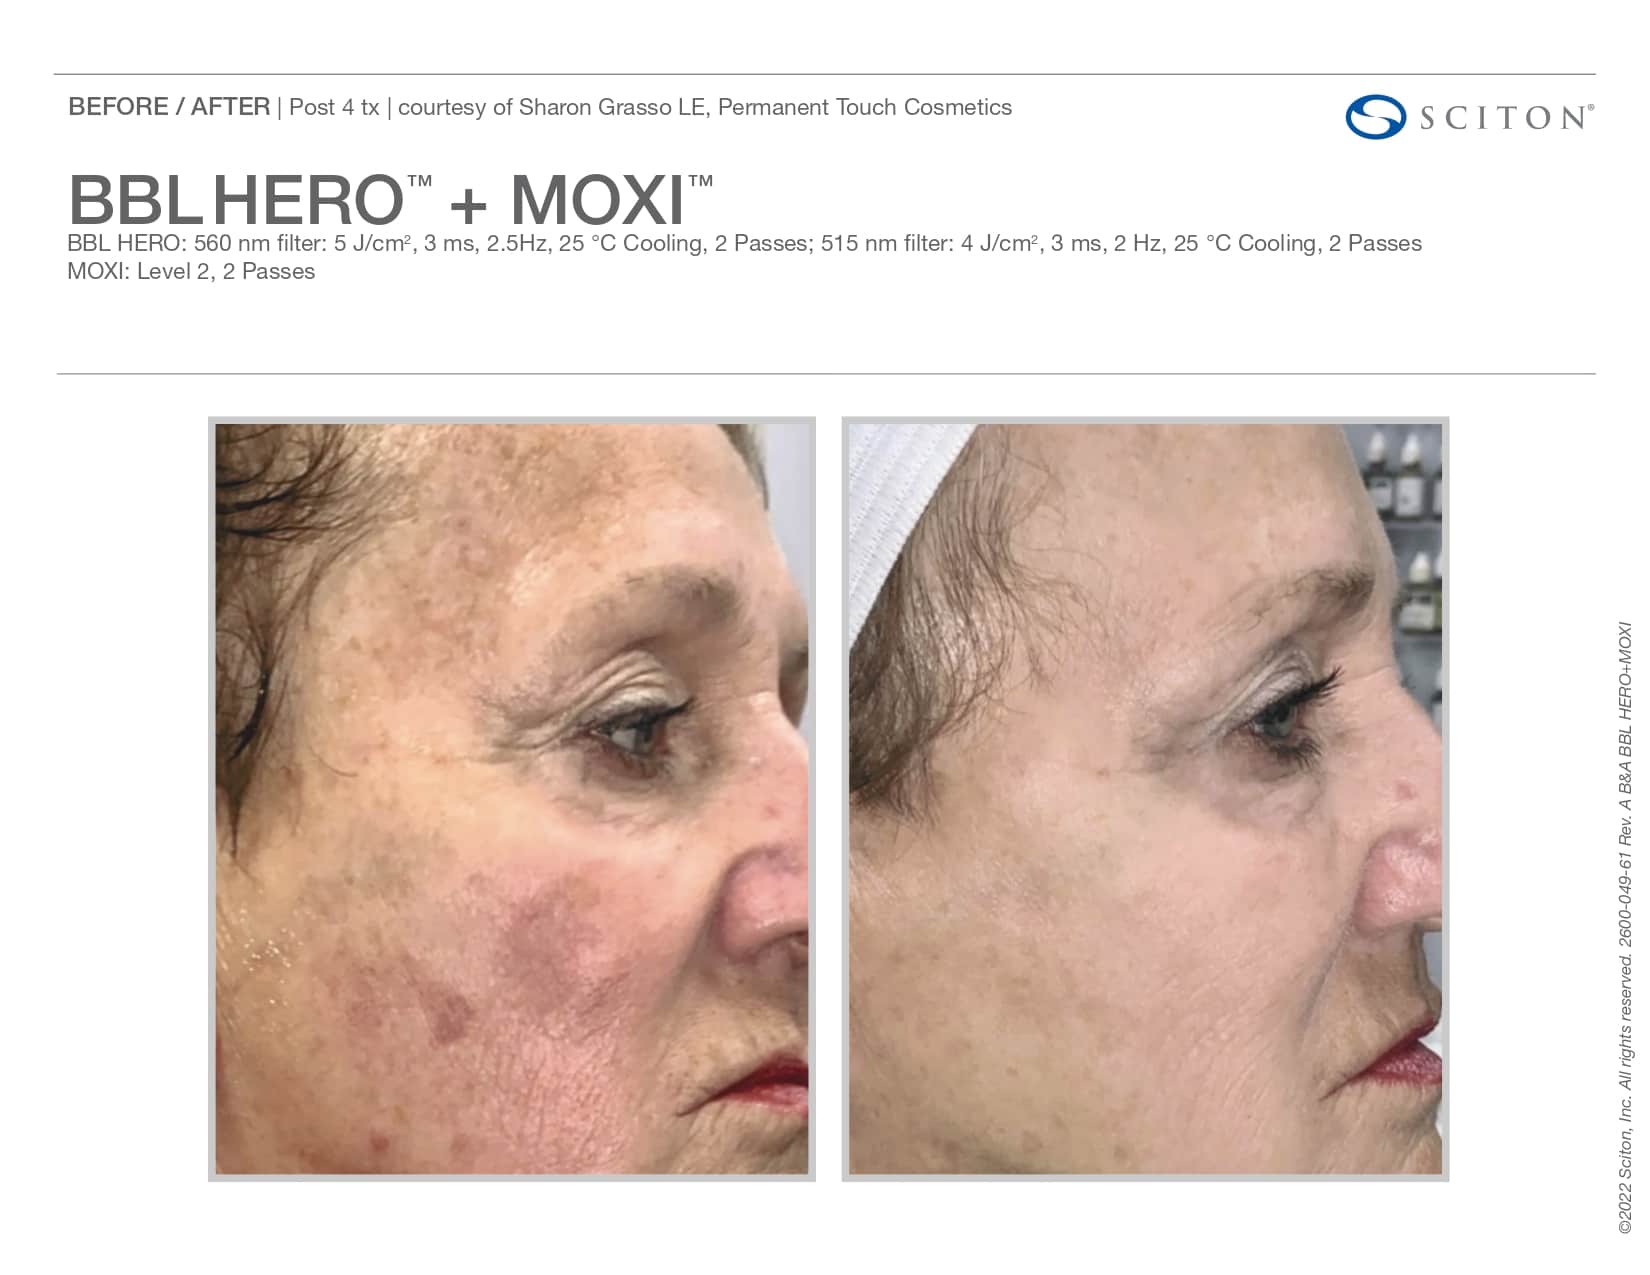 Side of older female patient’s face before and after BBL HERO and MOXI skin treatments, skin clearer after